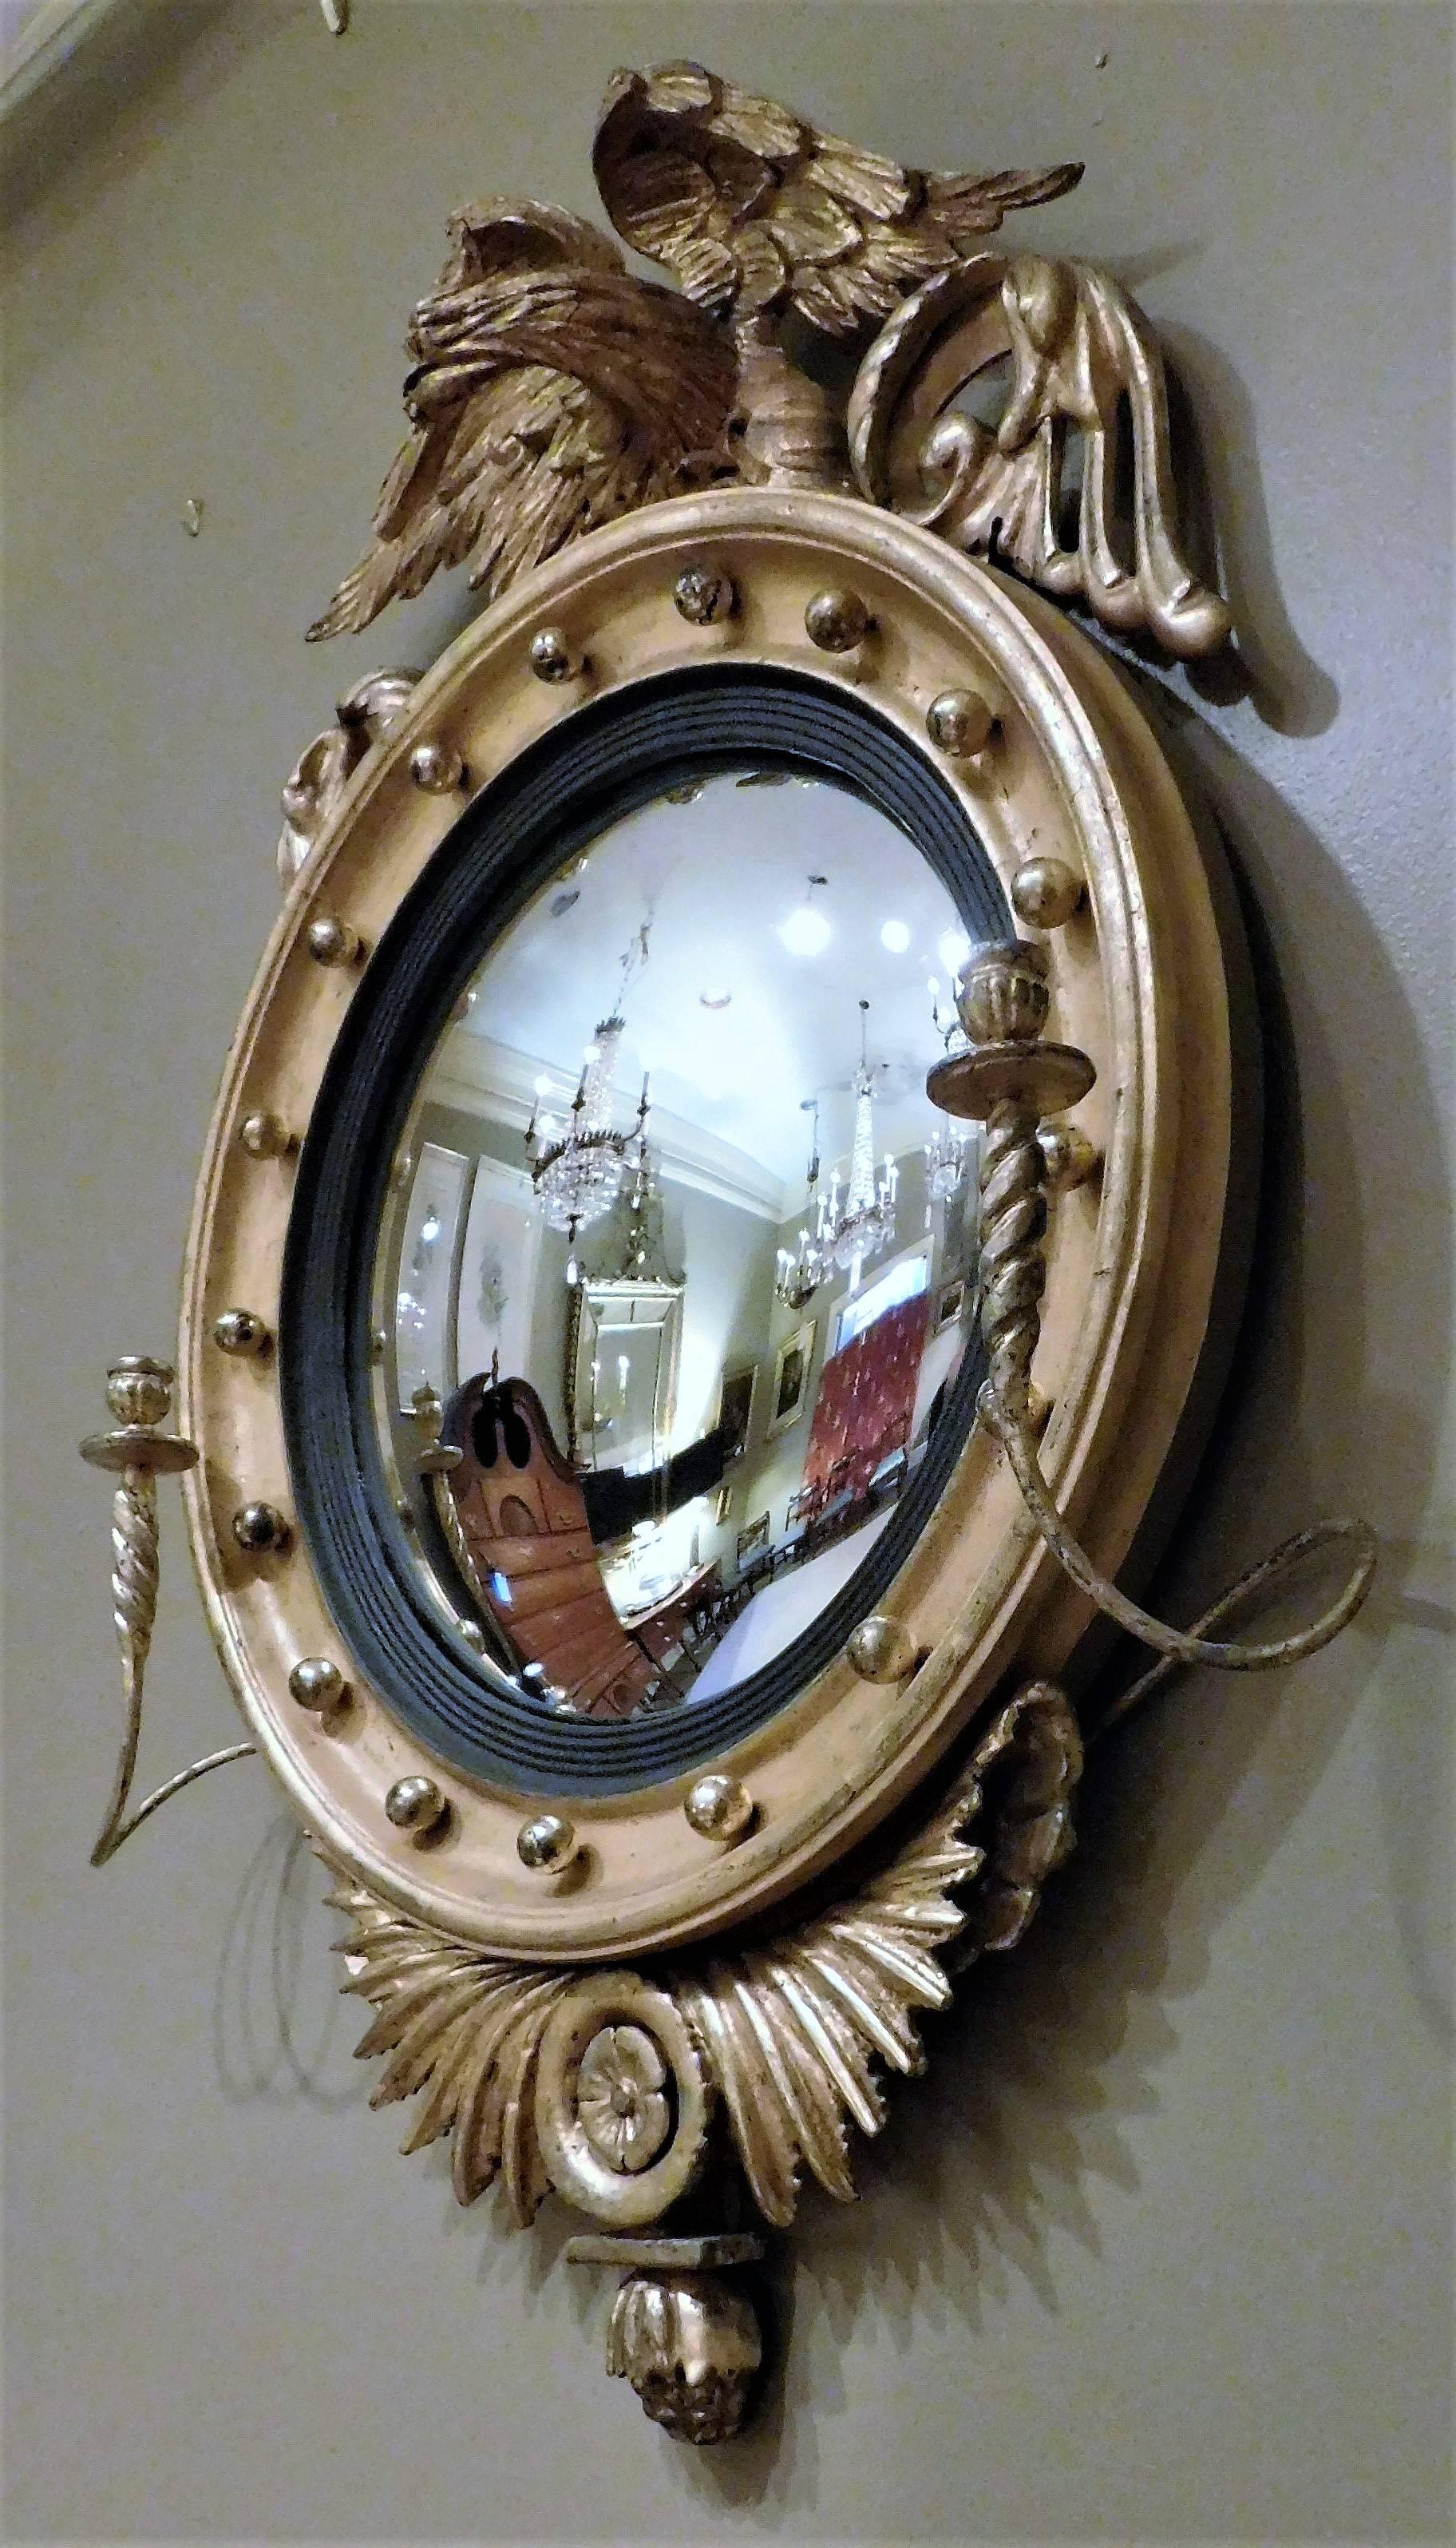 Carved and giltwood convex mirror with candle arms (girandole), featuring spread wing eagle pediment, with ebonized reeded surround, flanked by spiral twist sconces, terminating in carved and gilt wing and rosette. Probably made in New York. This